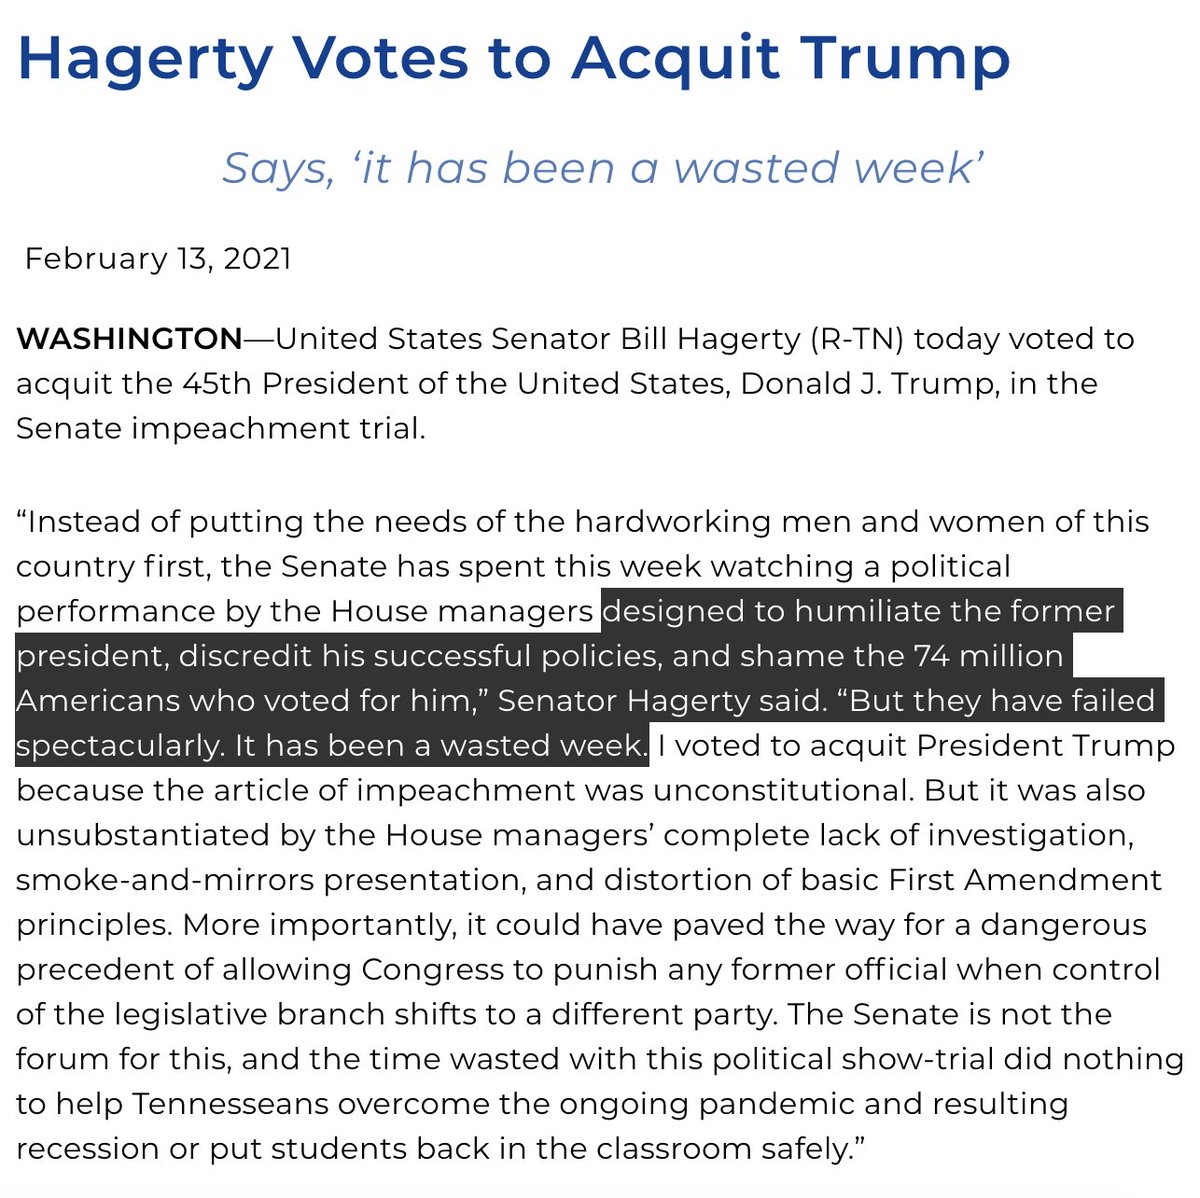 Hagerty statement might be even friendlier for Trump. Says the House managers wanted to "humiliate the former president, discredit his successful policies, and shame the 74 million Americans who voted for him" but "failed spectacularly"